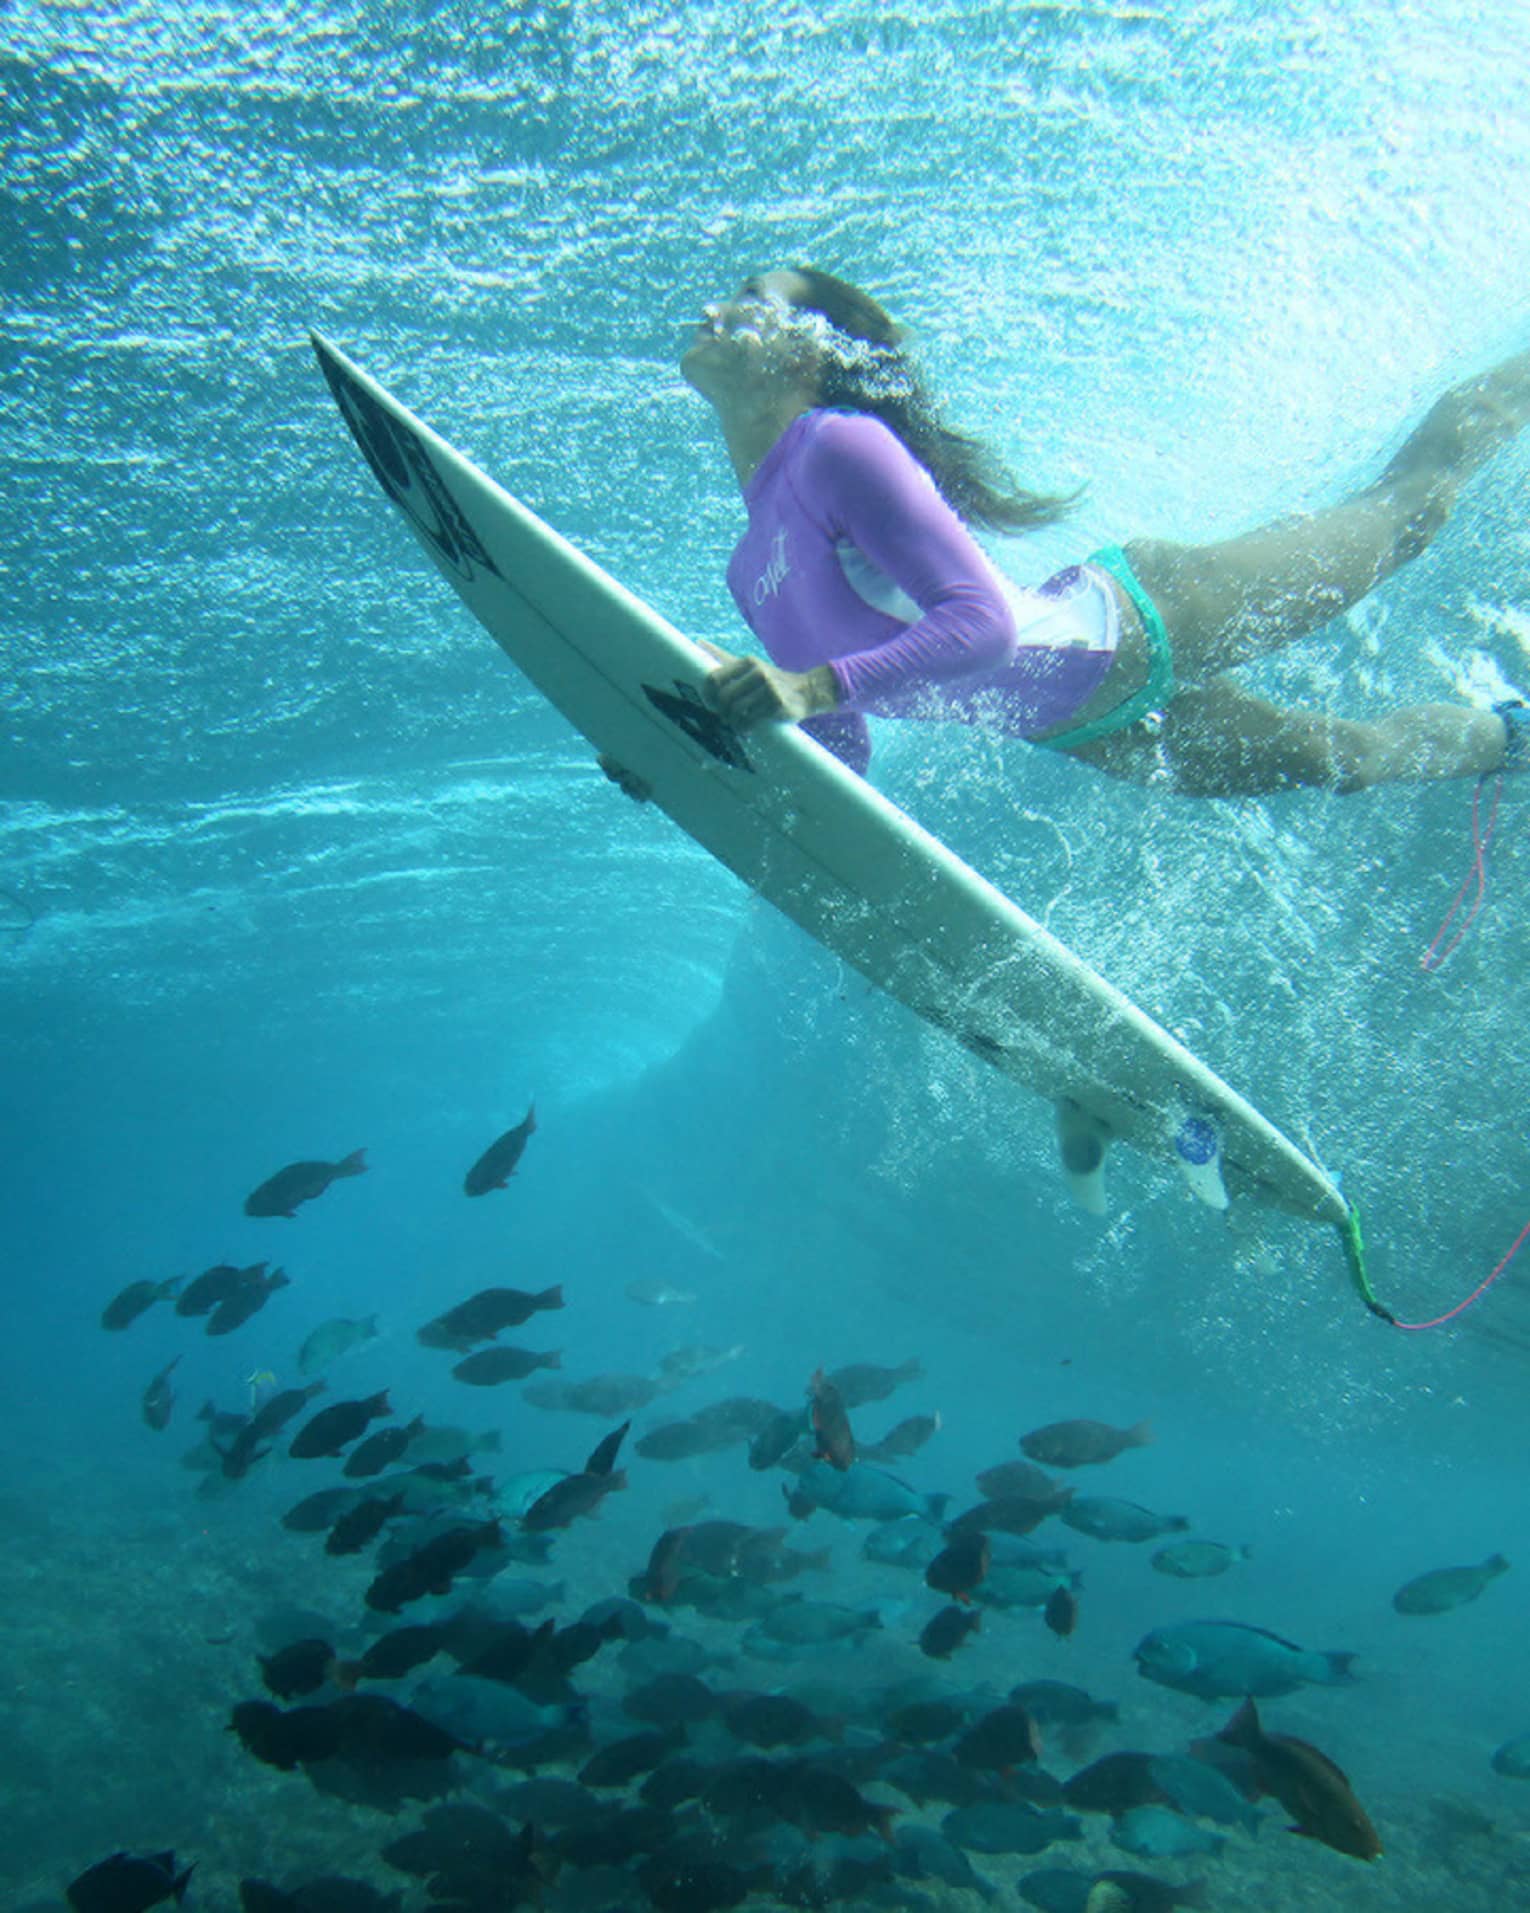 Céline Gehret, ascending from the water above a school of fish as she surfs in the Maldives